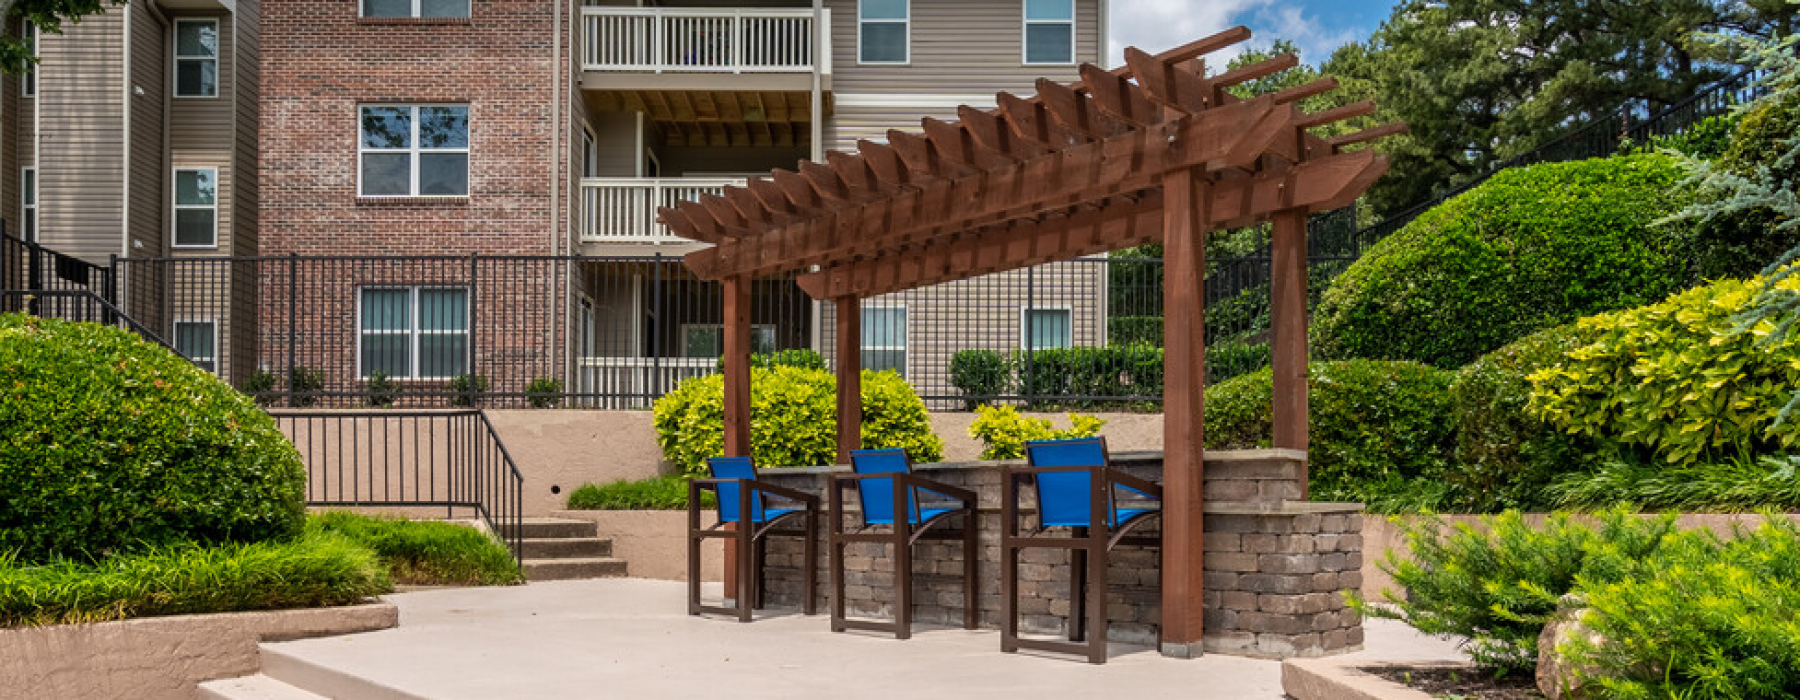 Pull up a chair at our outdoor pergola and grill